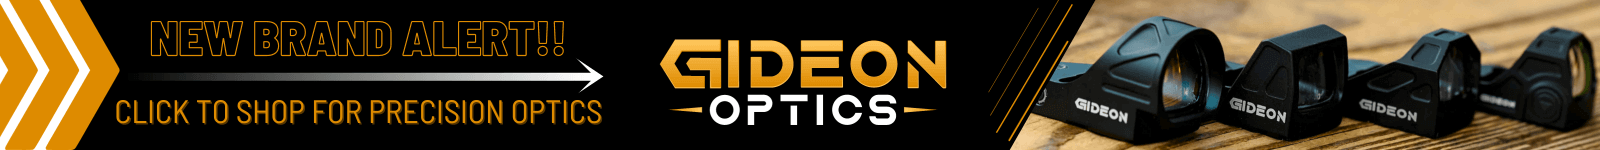 Banner announcing the arrival of gideon optics to JSD Supply's store